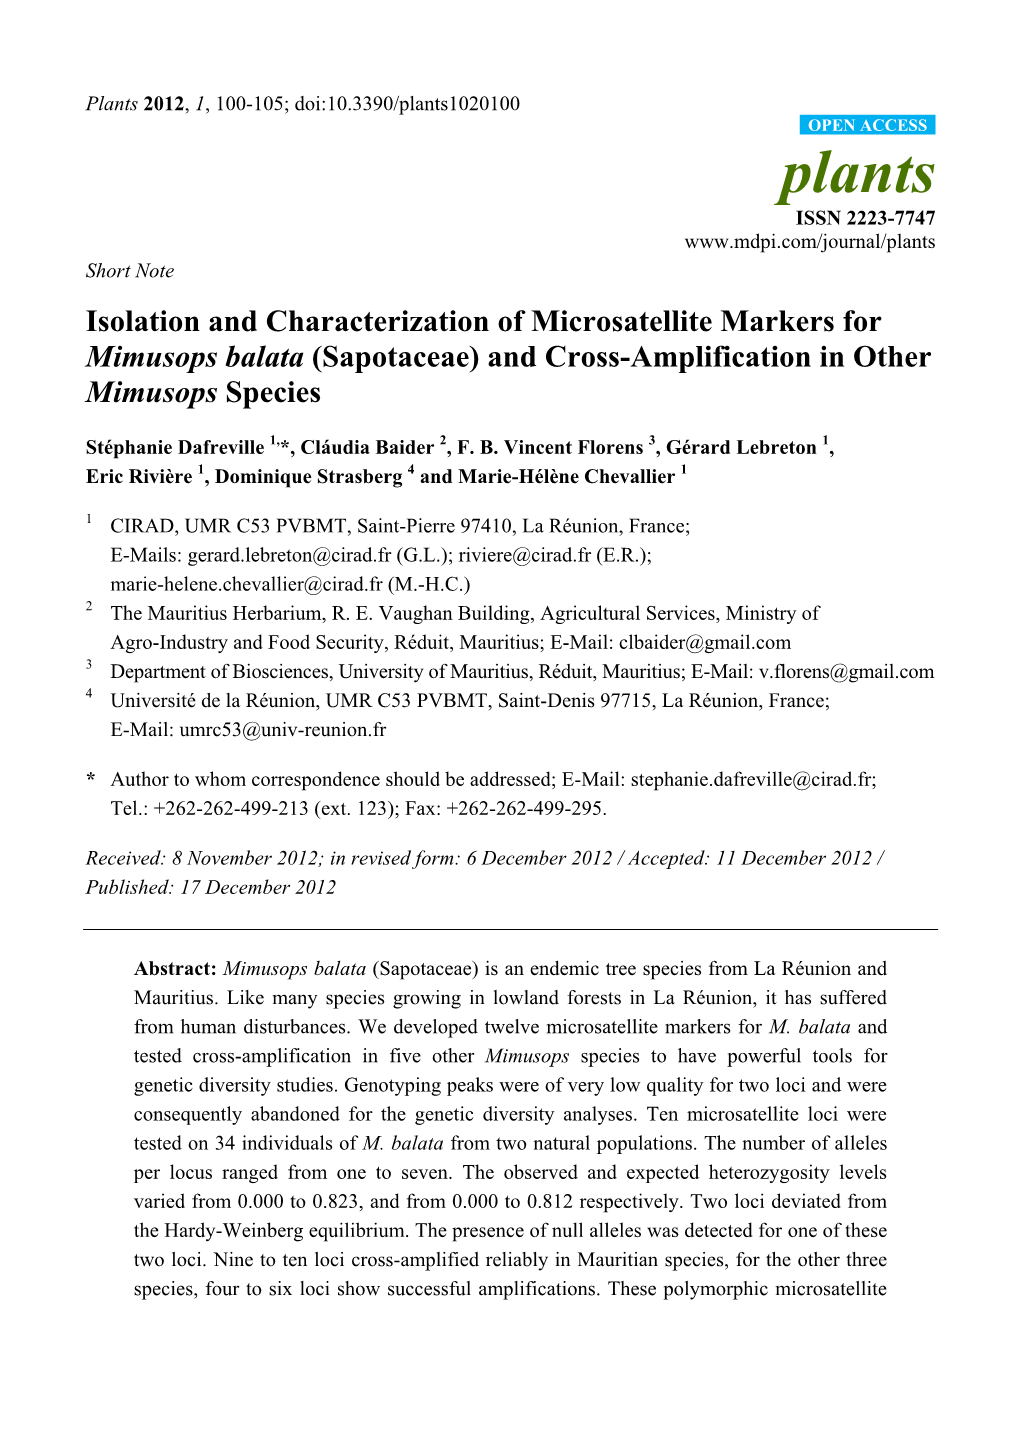 Isolation and Characterization of Microsatellite Markers for Mimusops Balata (Sapotaceae) and Cross-Amplification in Other Mimusops Species